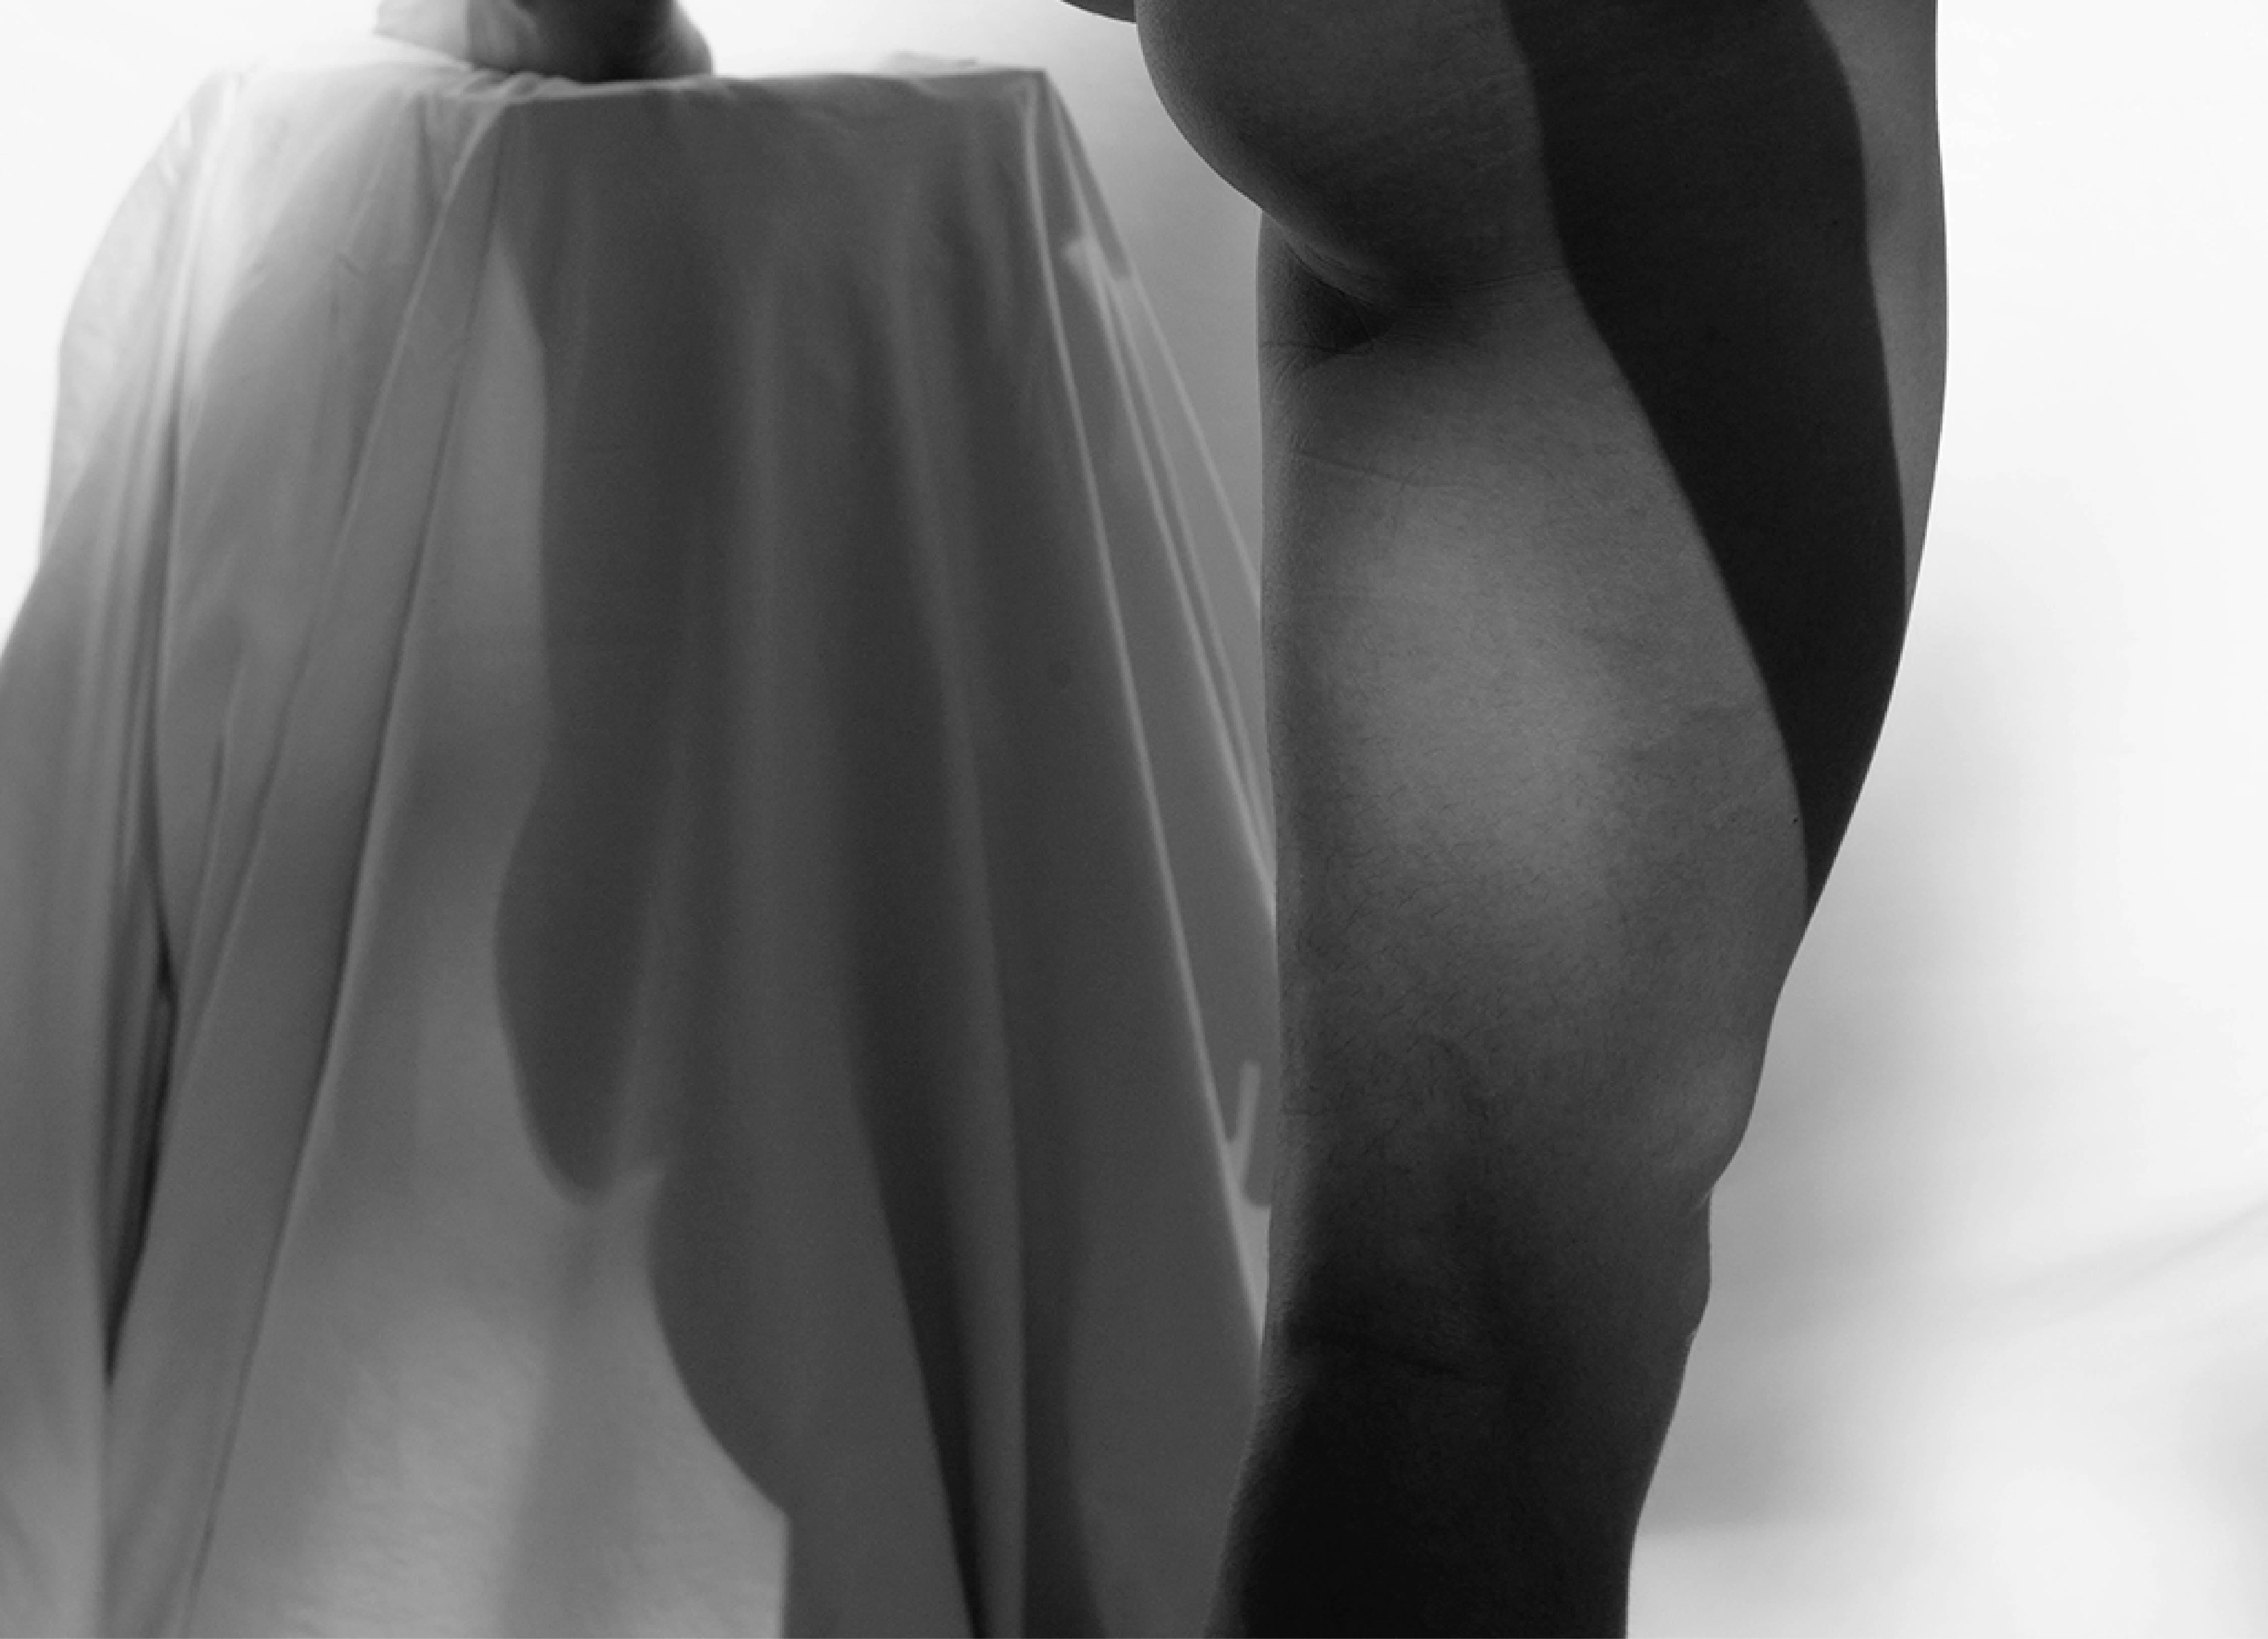 Untitled. Espiral, series. Male Nude. Black and White Limited Edition Photograph For Sale 2